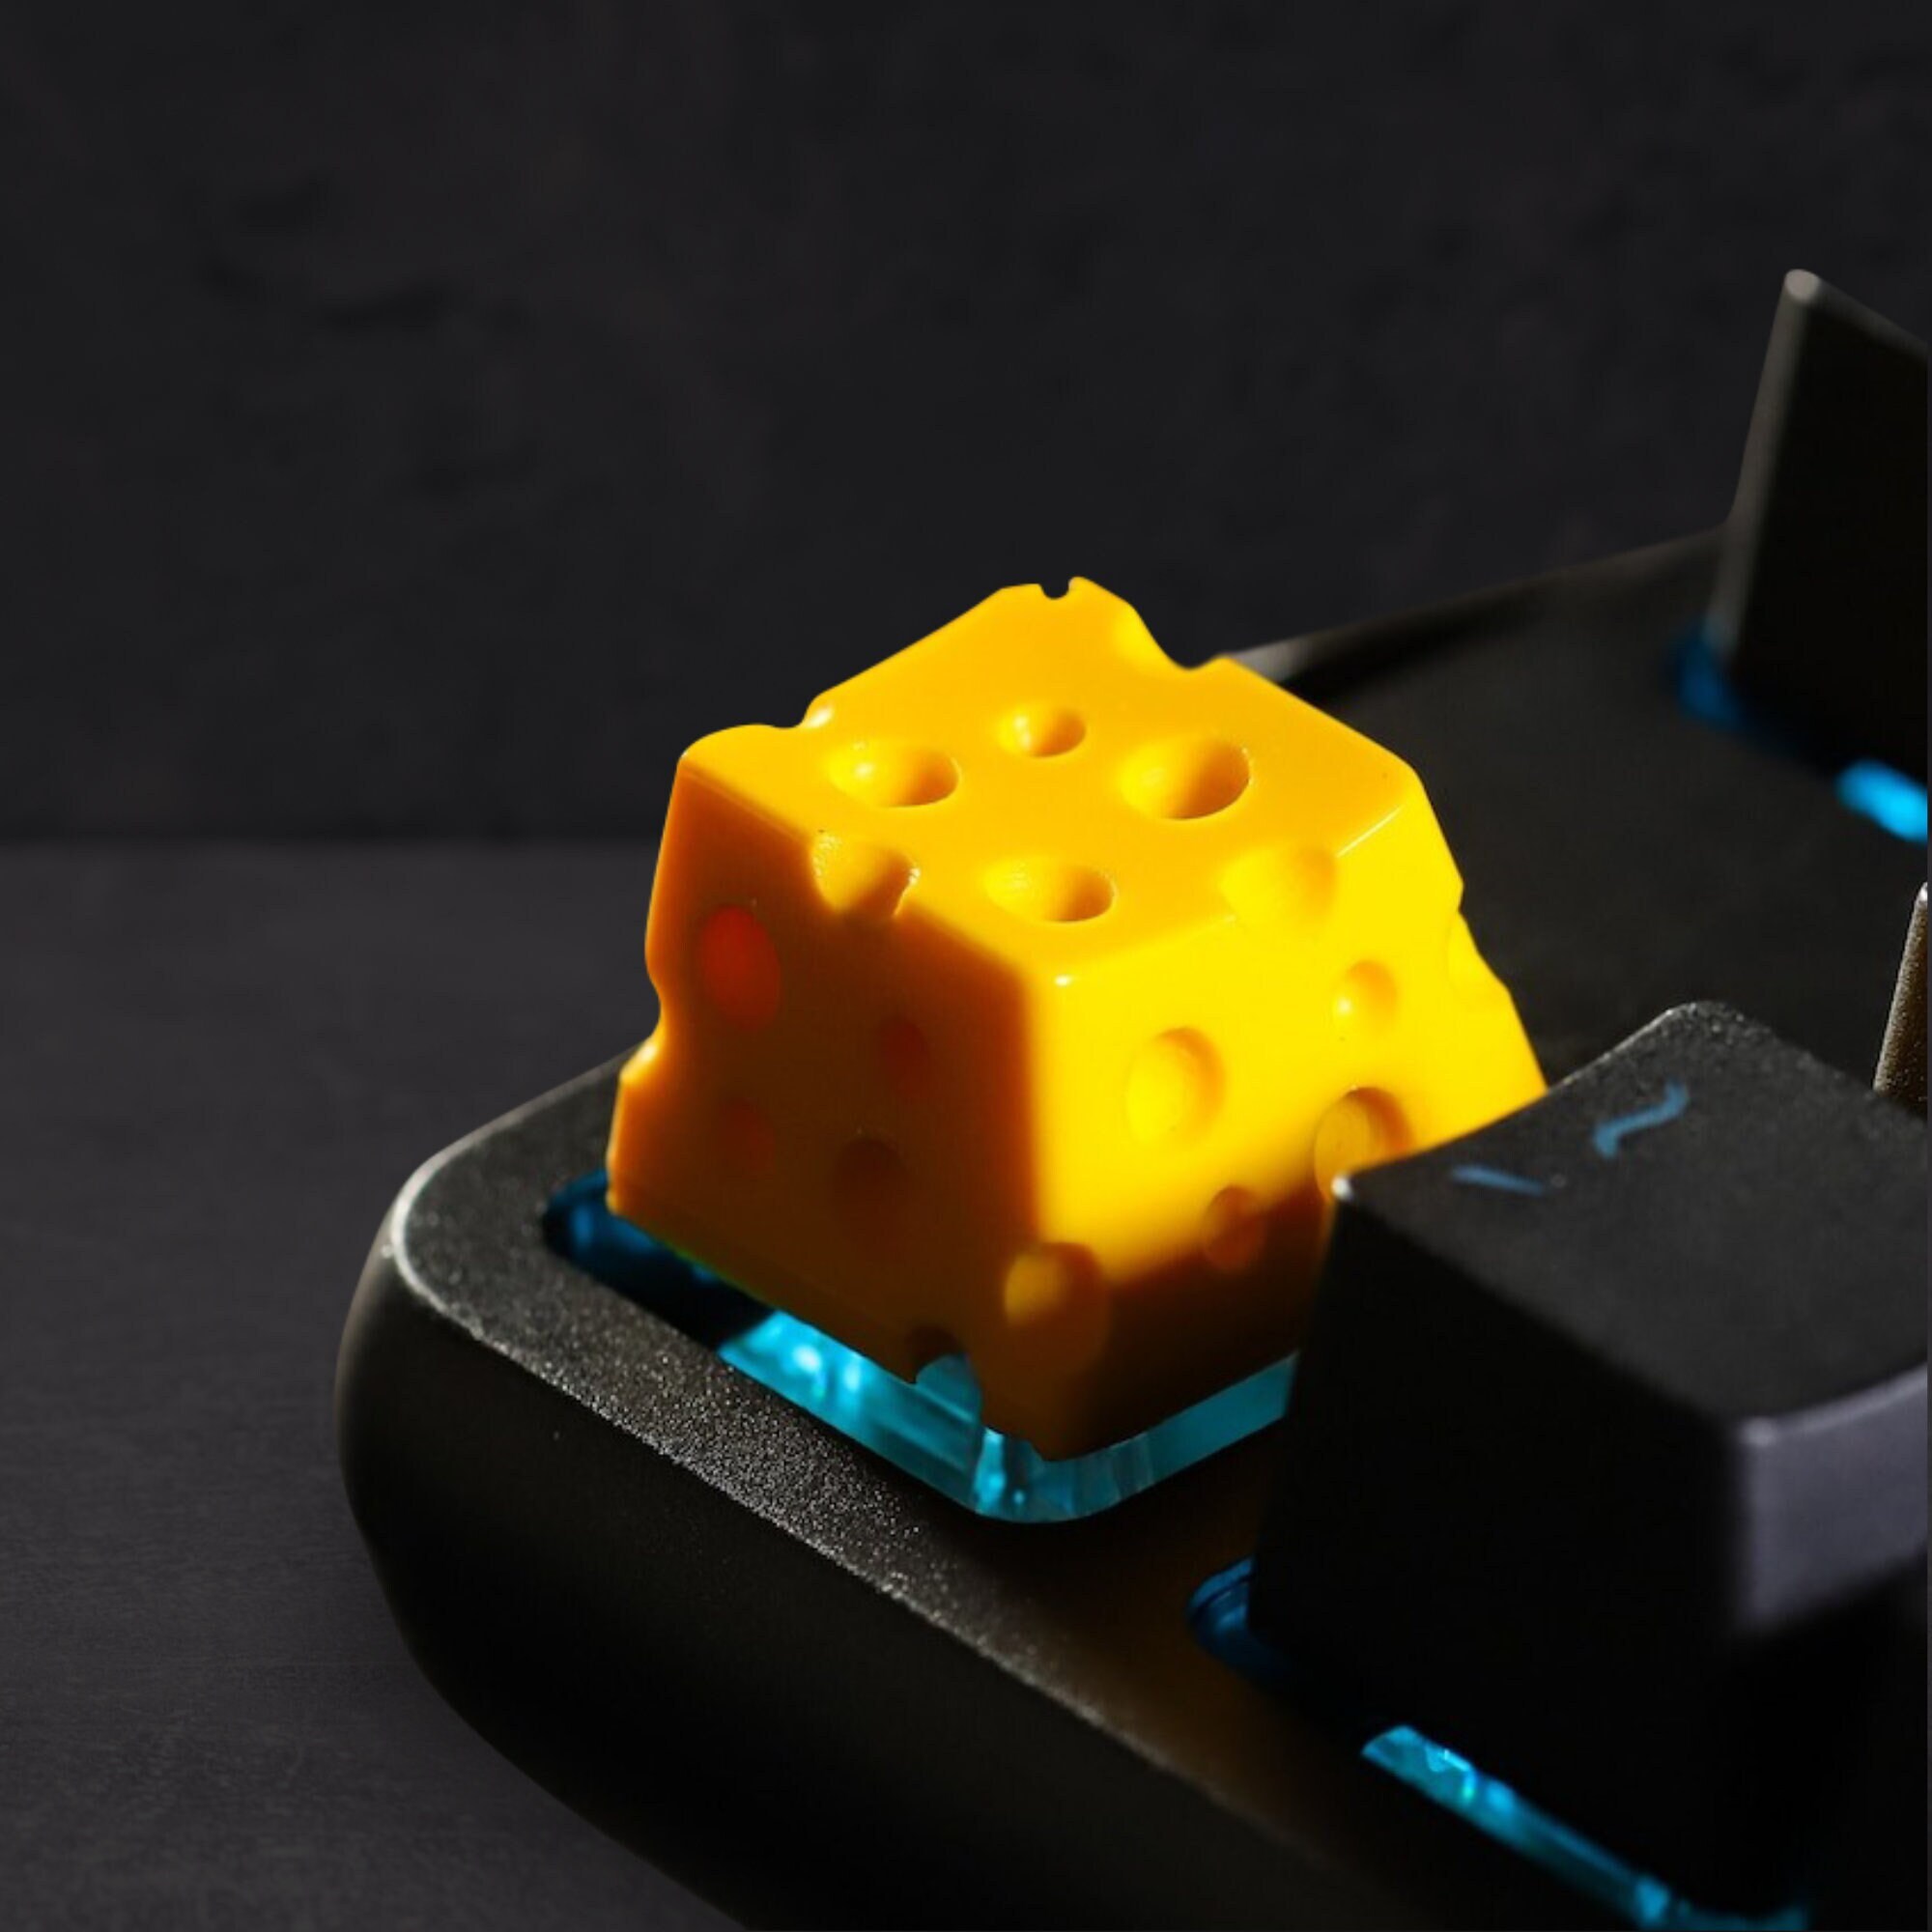 Cheese Keycap, 3D Keycap, Keycap for MX Cherry Switches Keyboard, OEM Profile Keycap, Handmade Gift